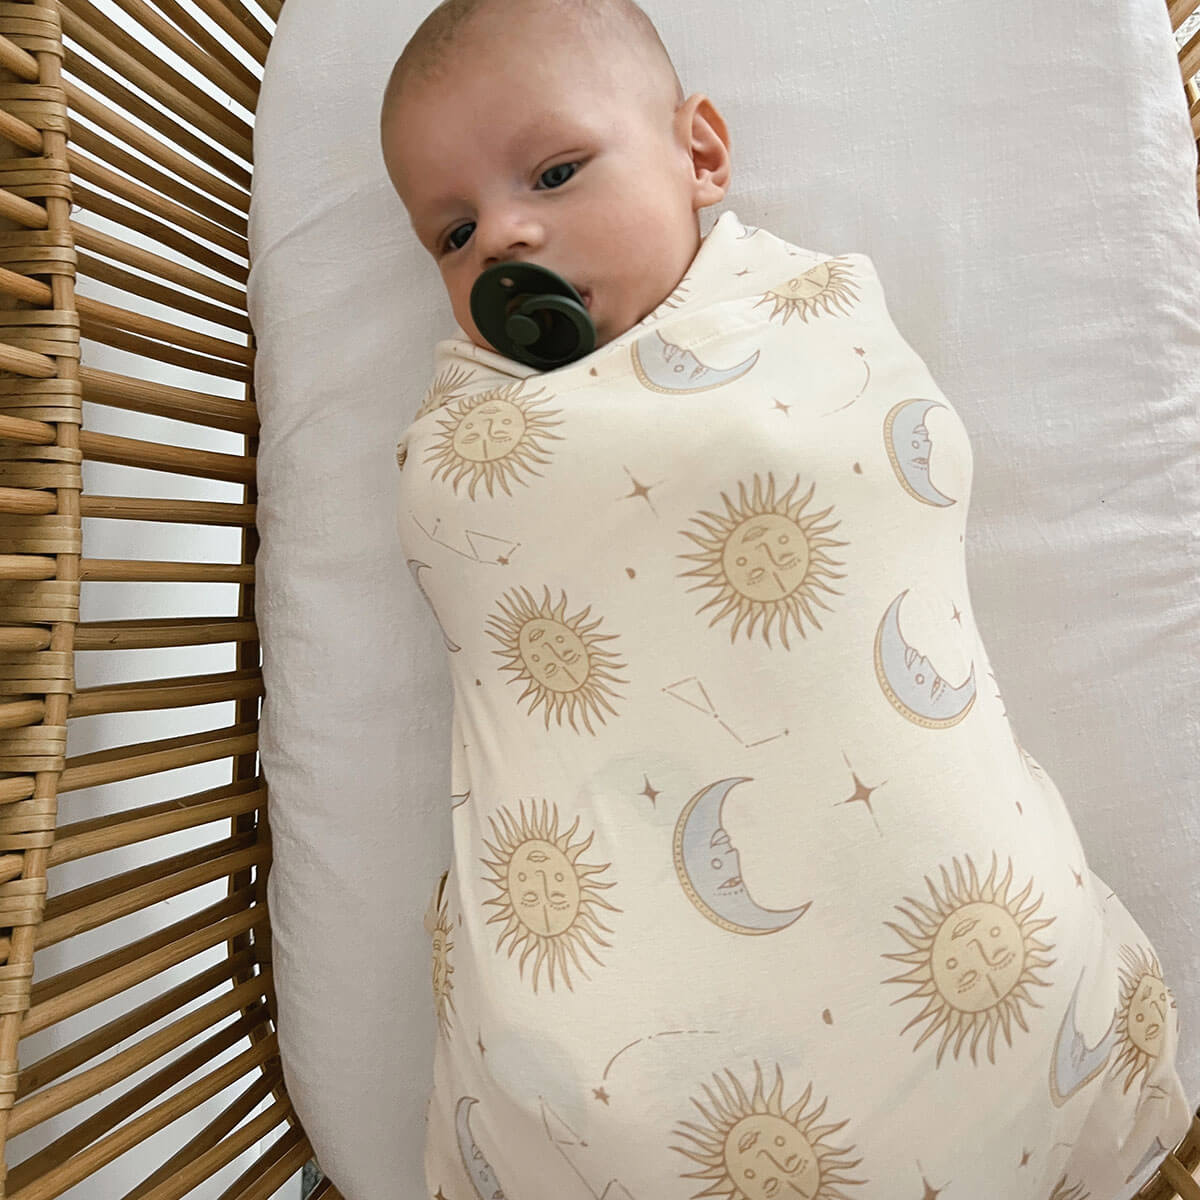 Celestial baby swaddle made from Bamboo organic cotton jersey